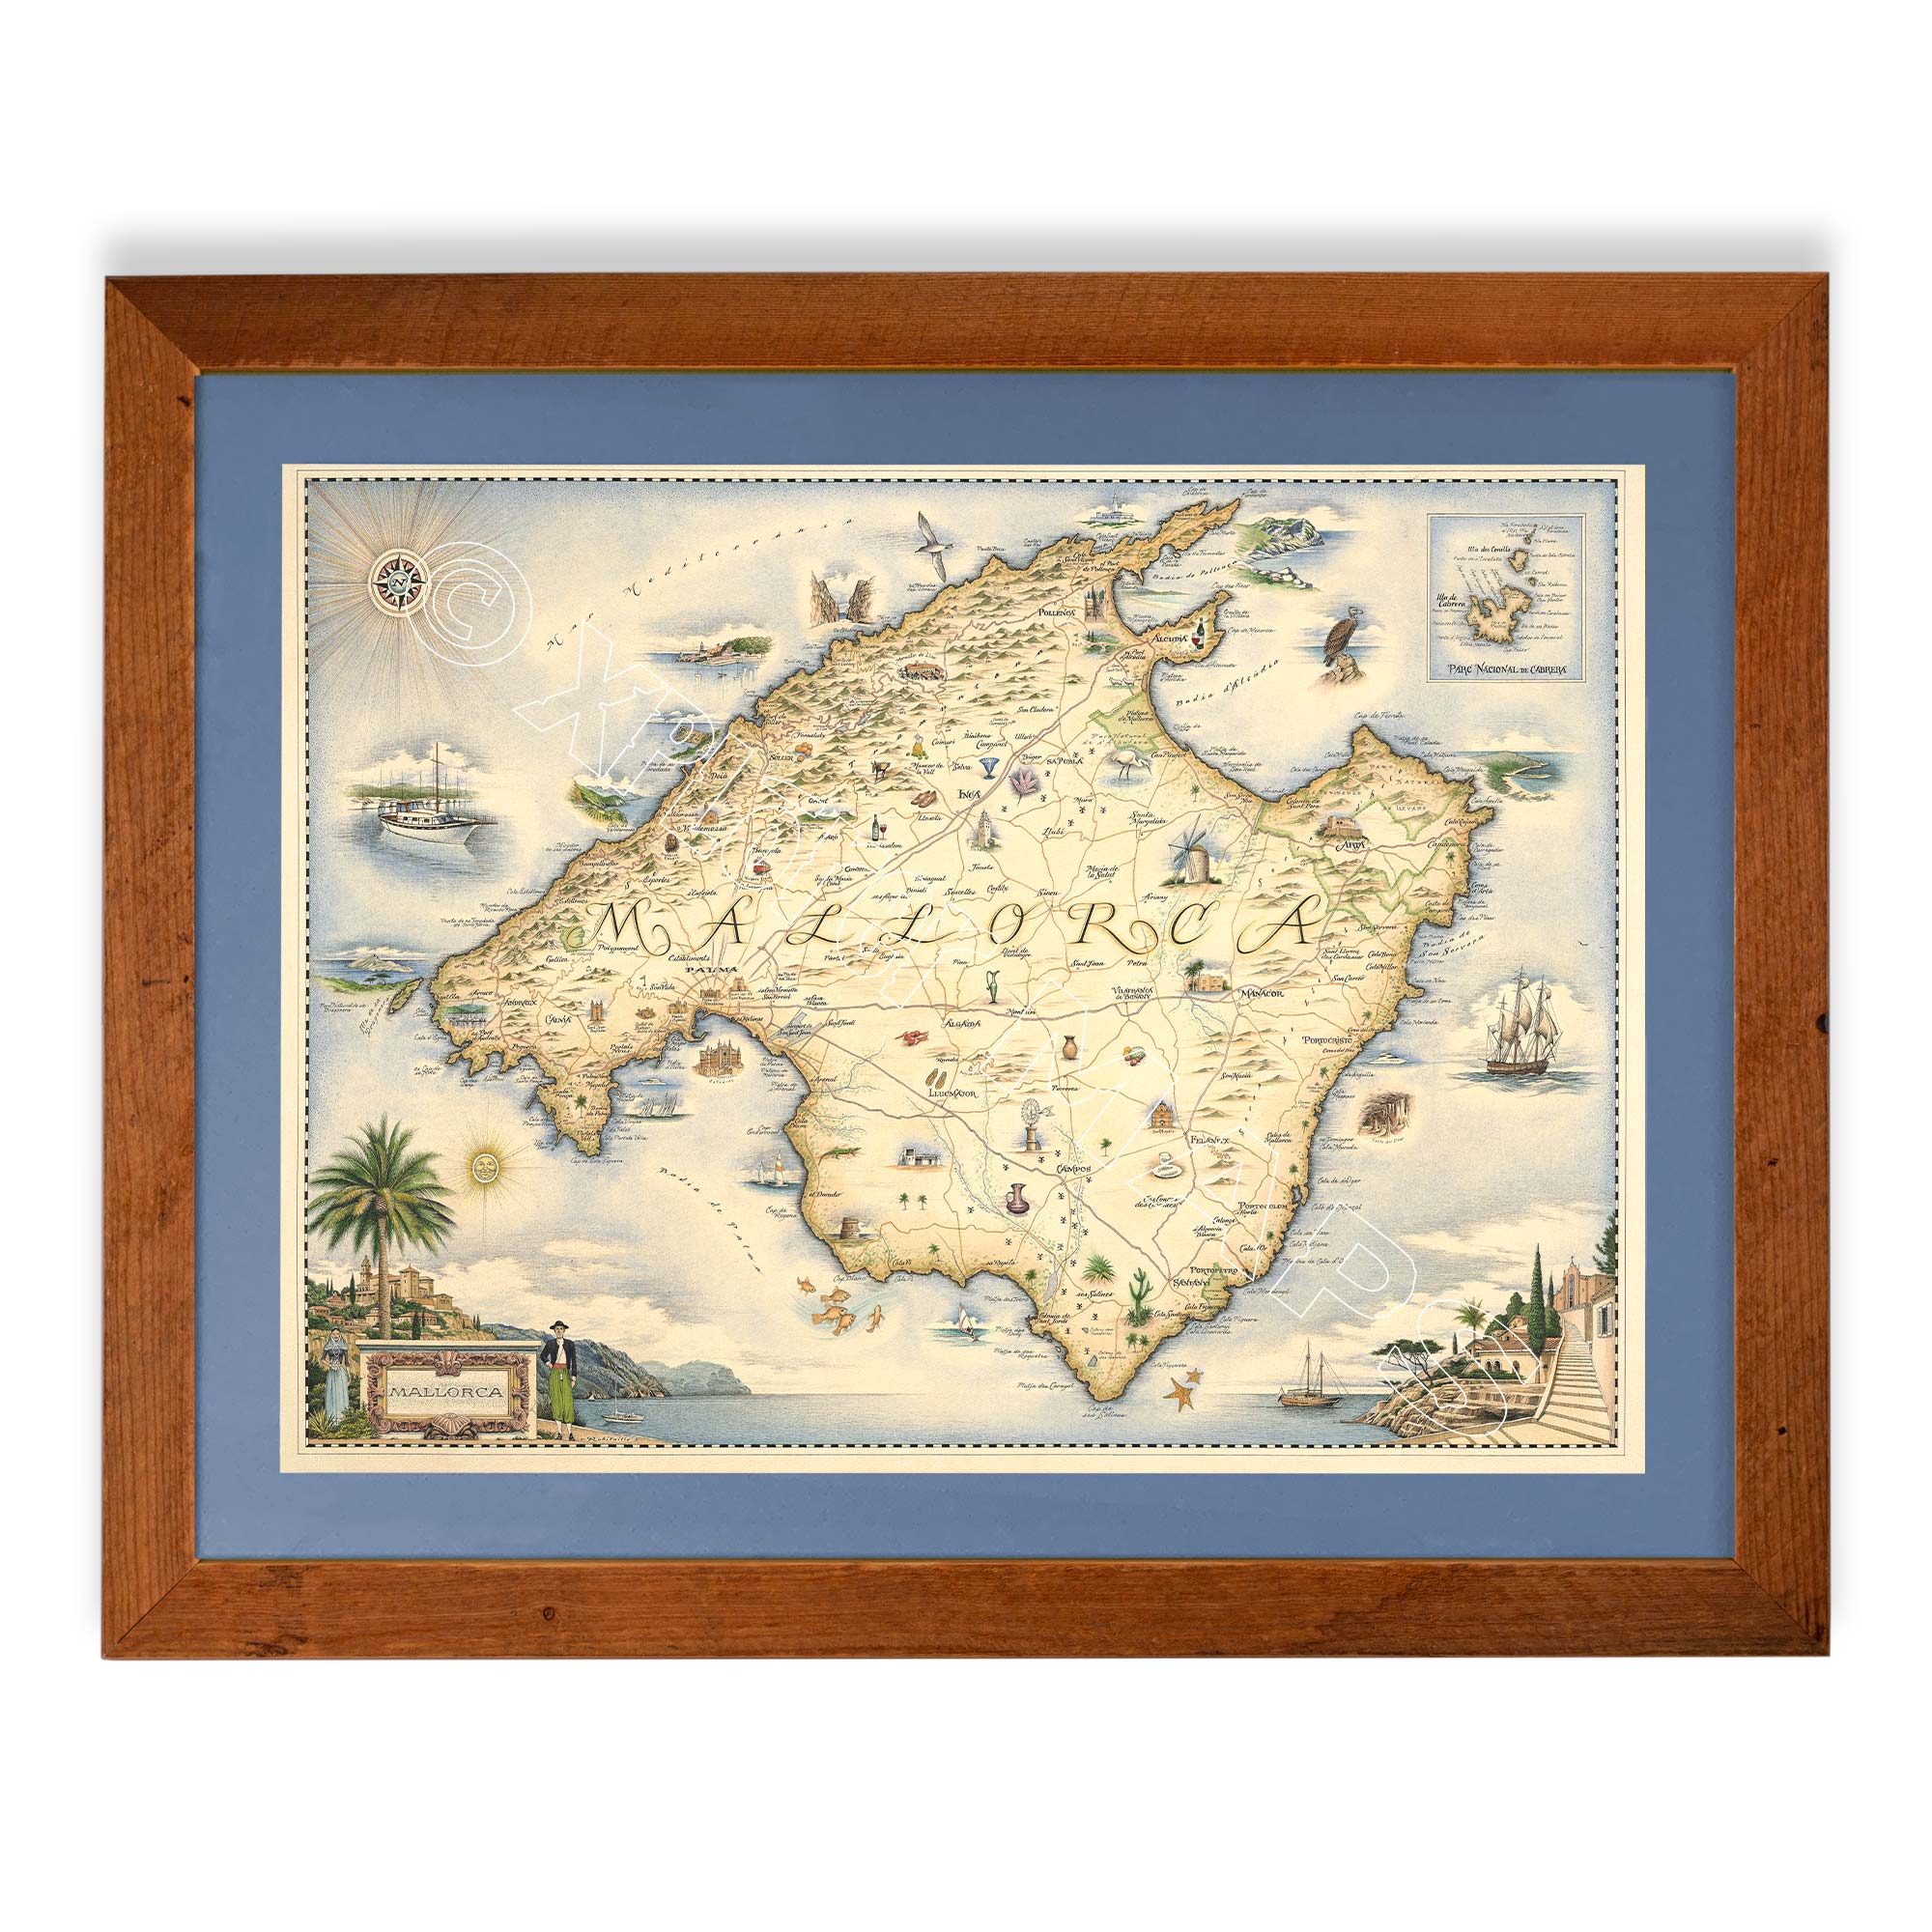 Mallorca Island hand-drawn map in a Montana Flathead Lake reclaimed larch wood frame and blue mat. 